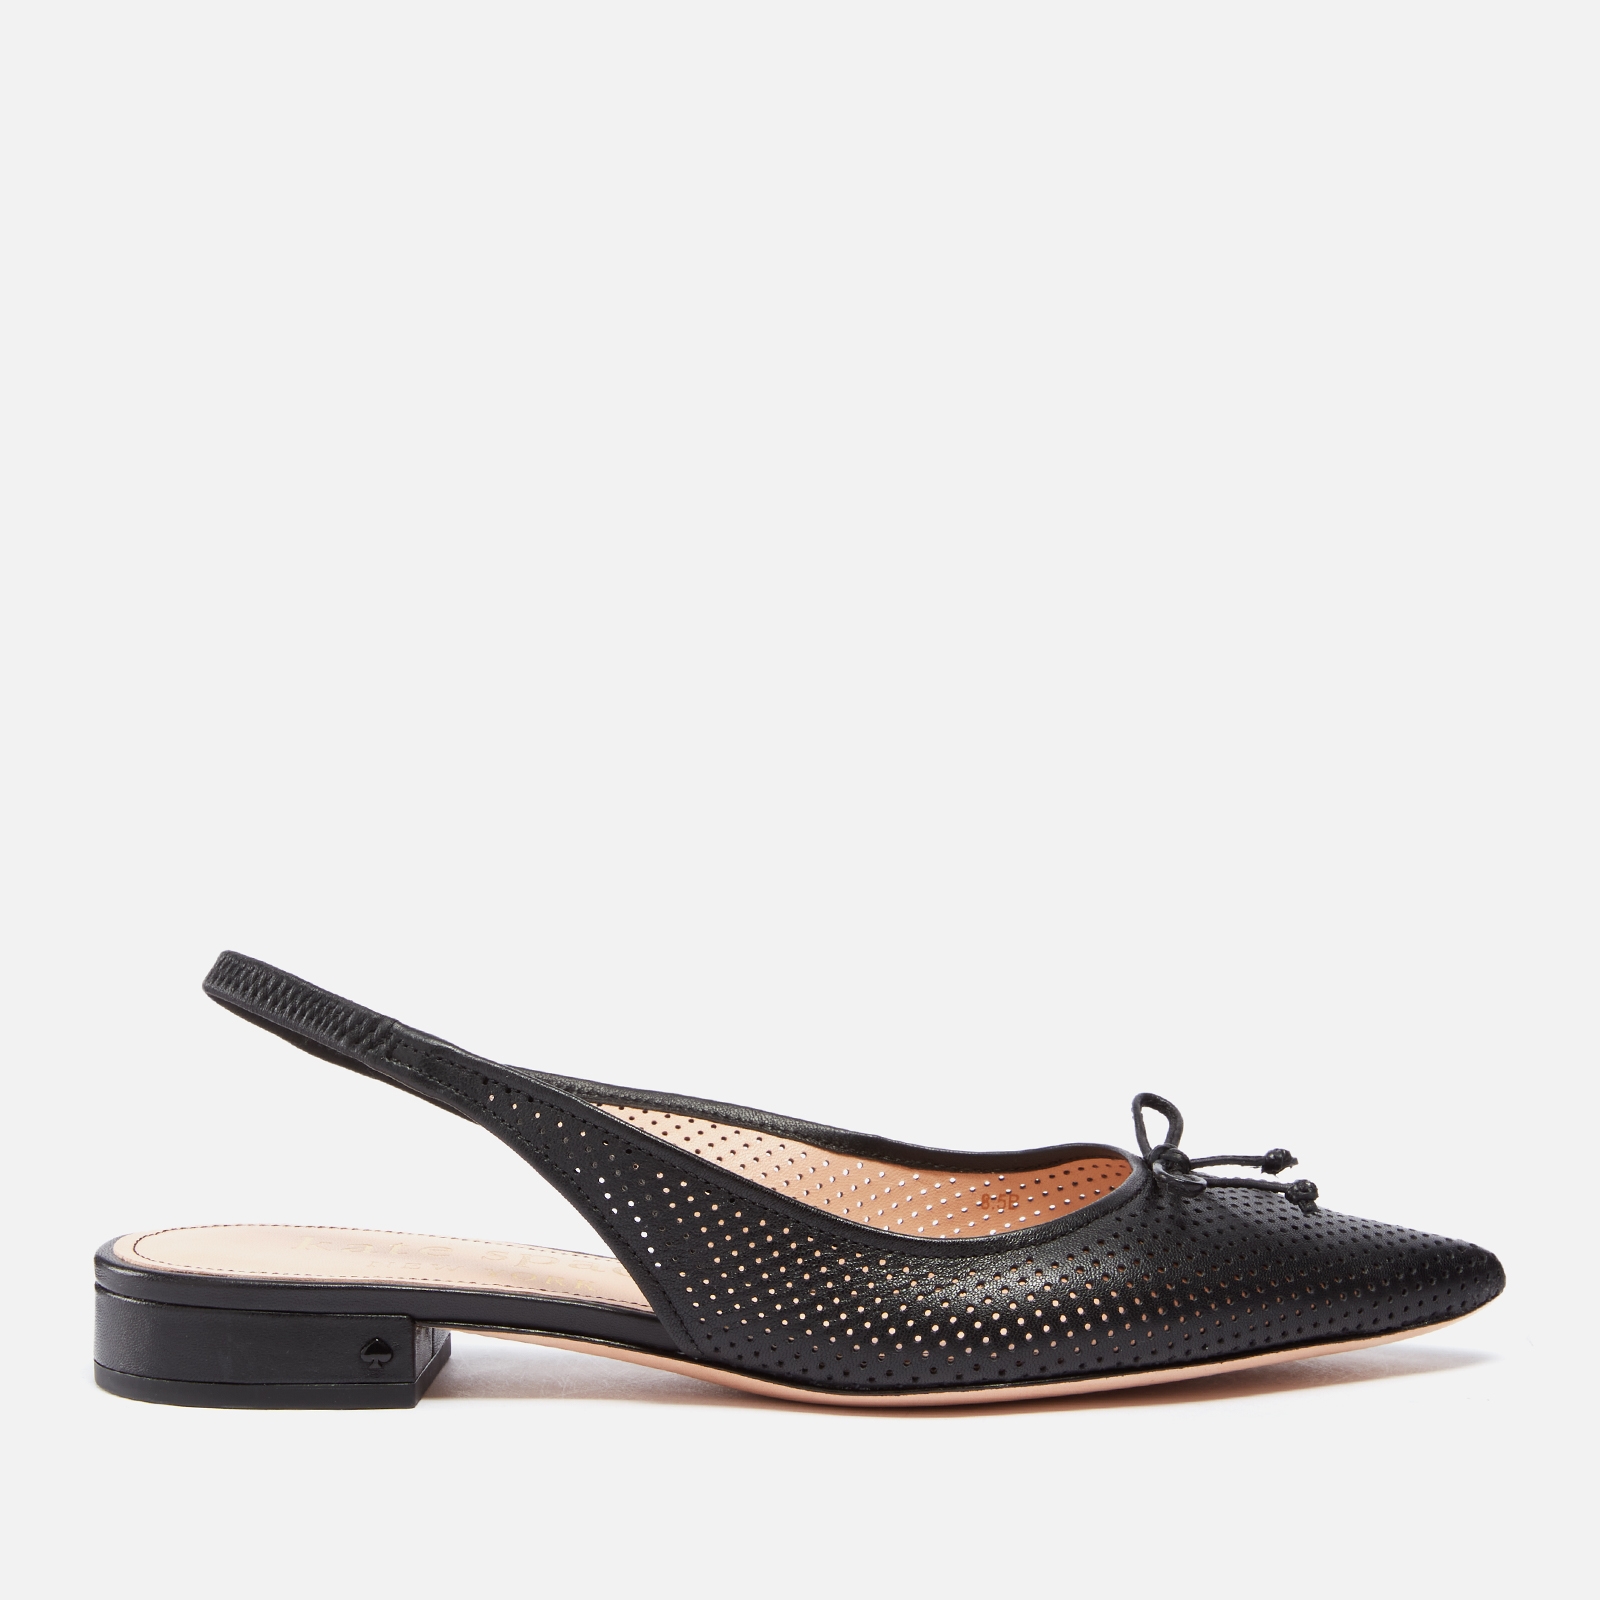 Kate Spade New York Women's Veronica Leather Slingback Shoes